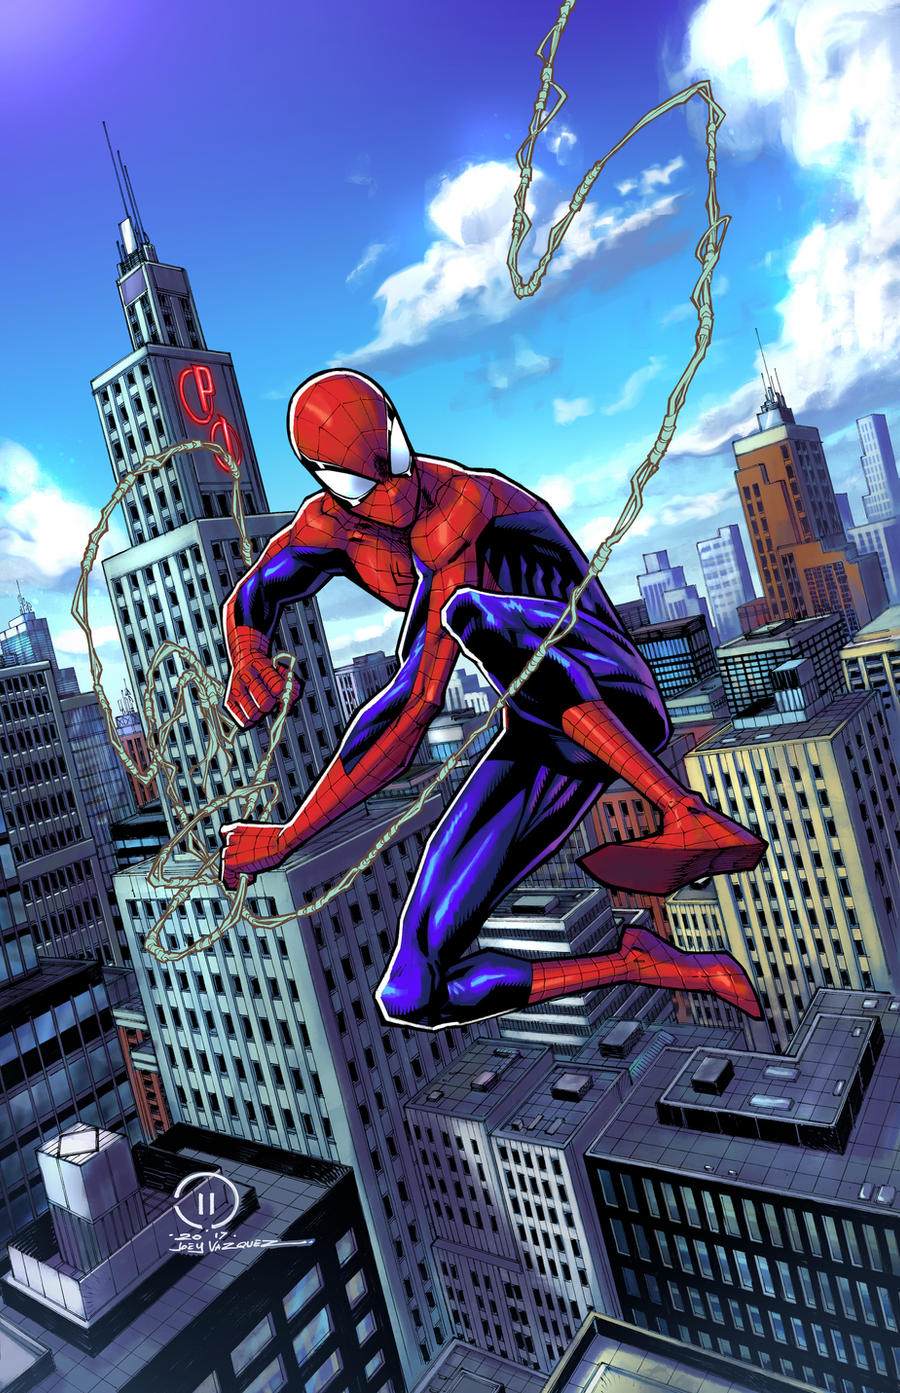 SPIDER-MAN swinging through the City colors by JoeyVazquez ...